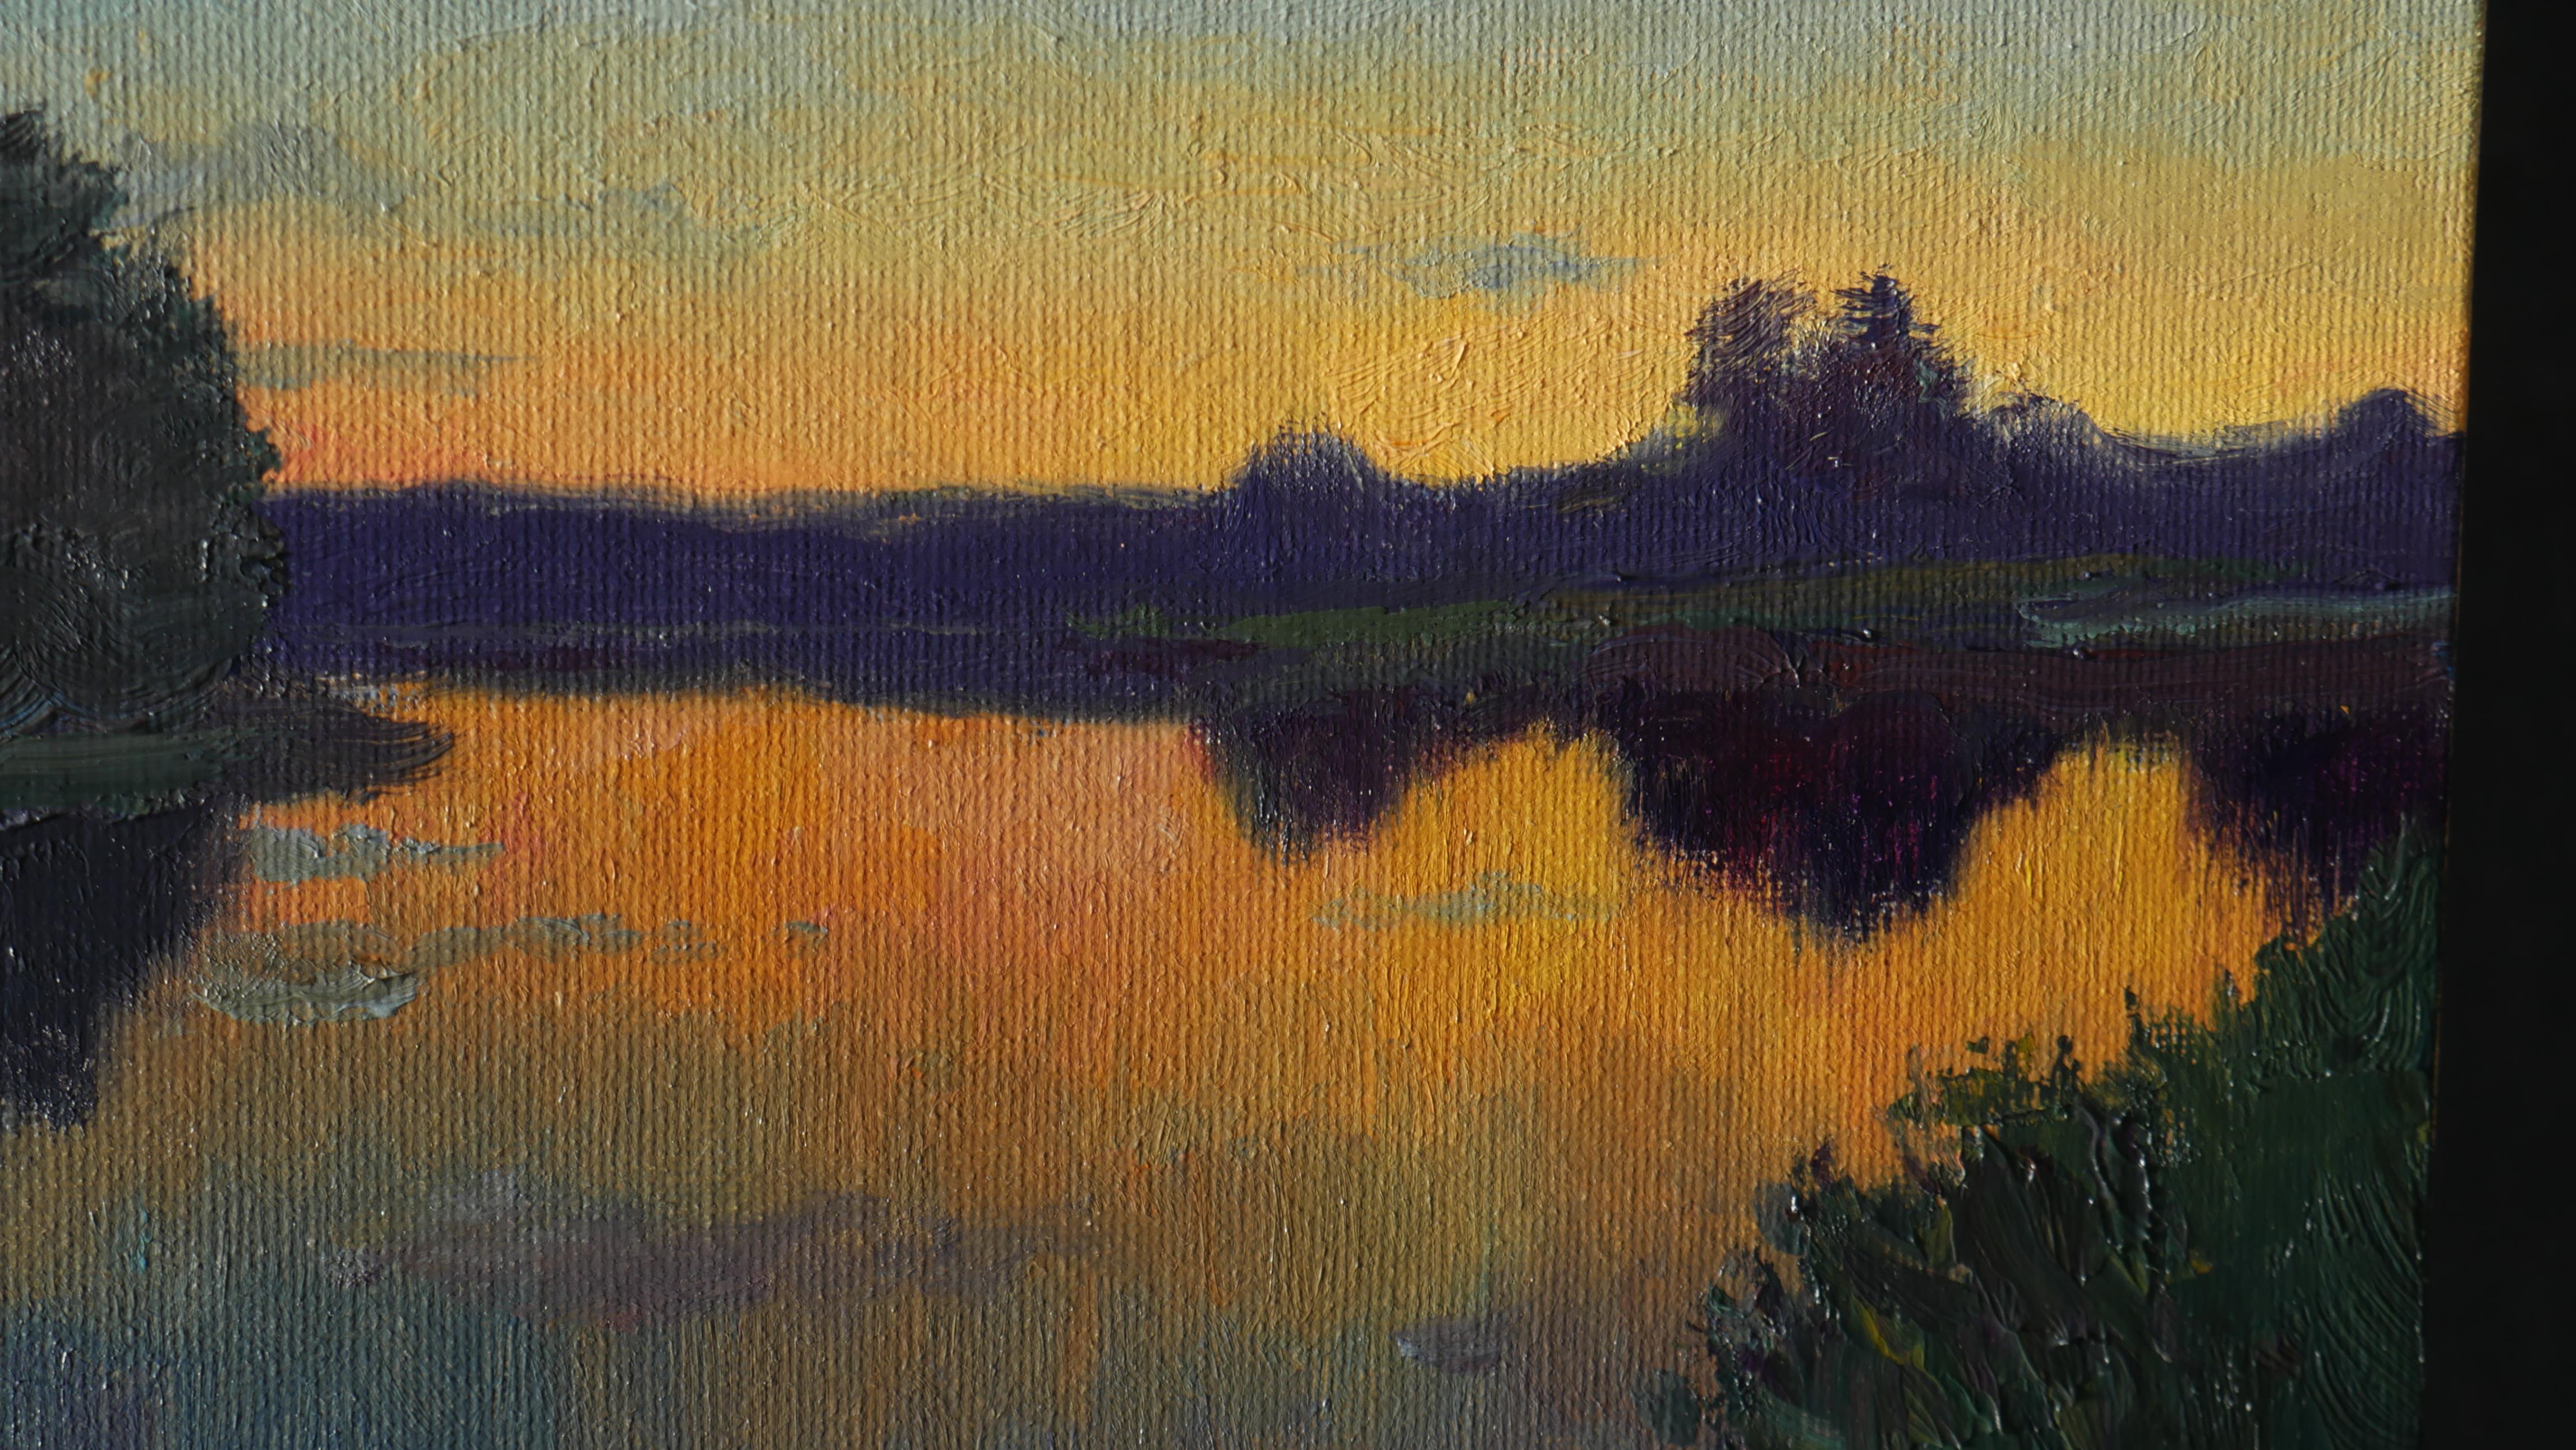 The evening impressionist painting with the pond and the setting Sun is a beautiful wall decor, the painting is full of different colours, combinations of warm and cold shades are professionally captured by the artist. The artwork is created en